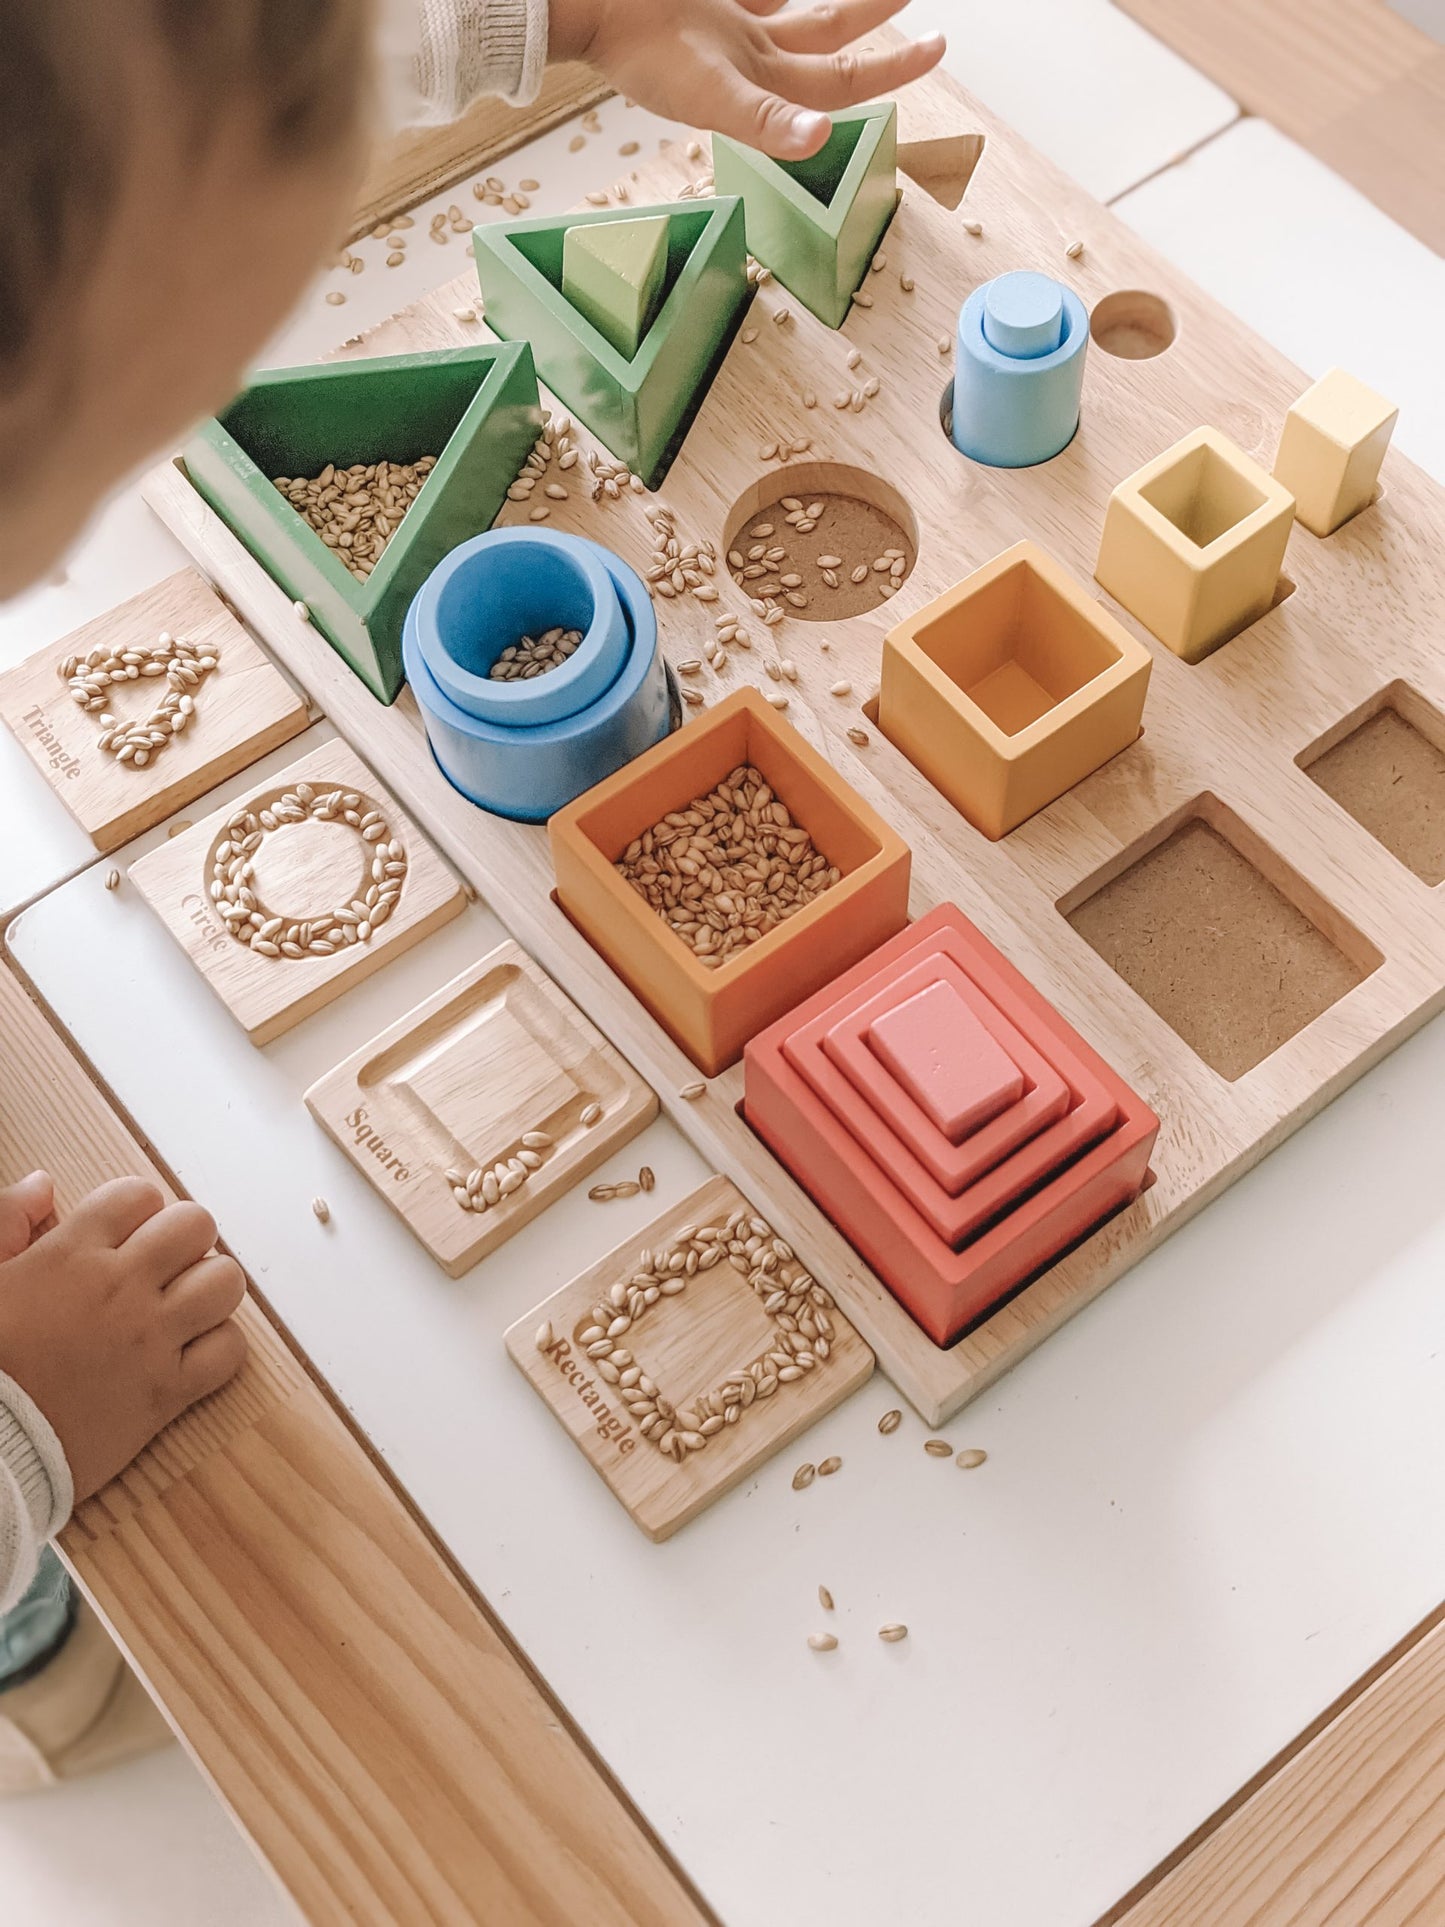 shape stacking wooden Montessori toy